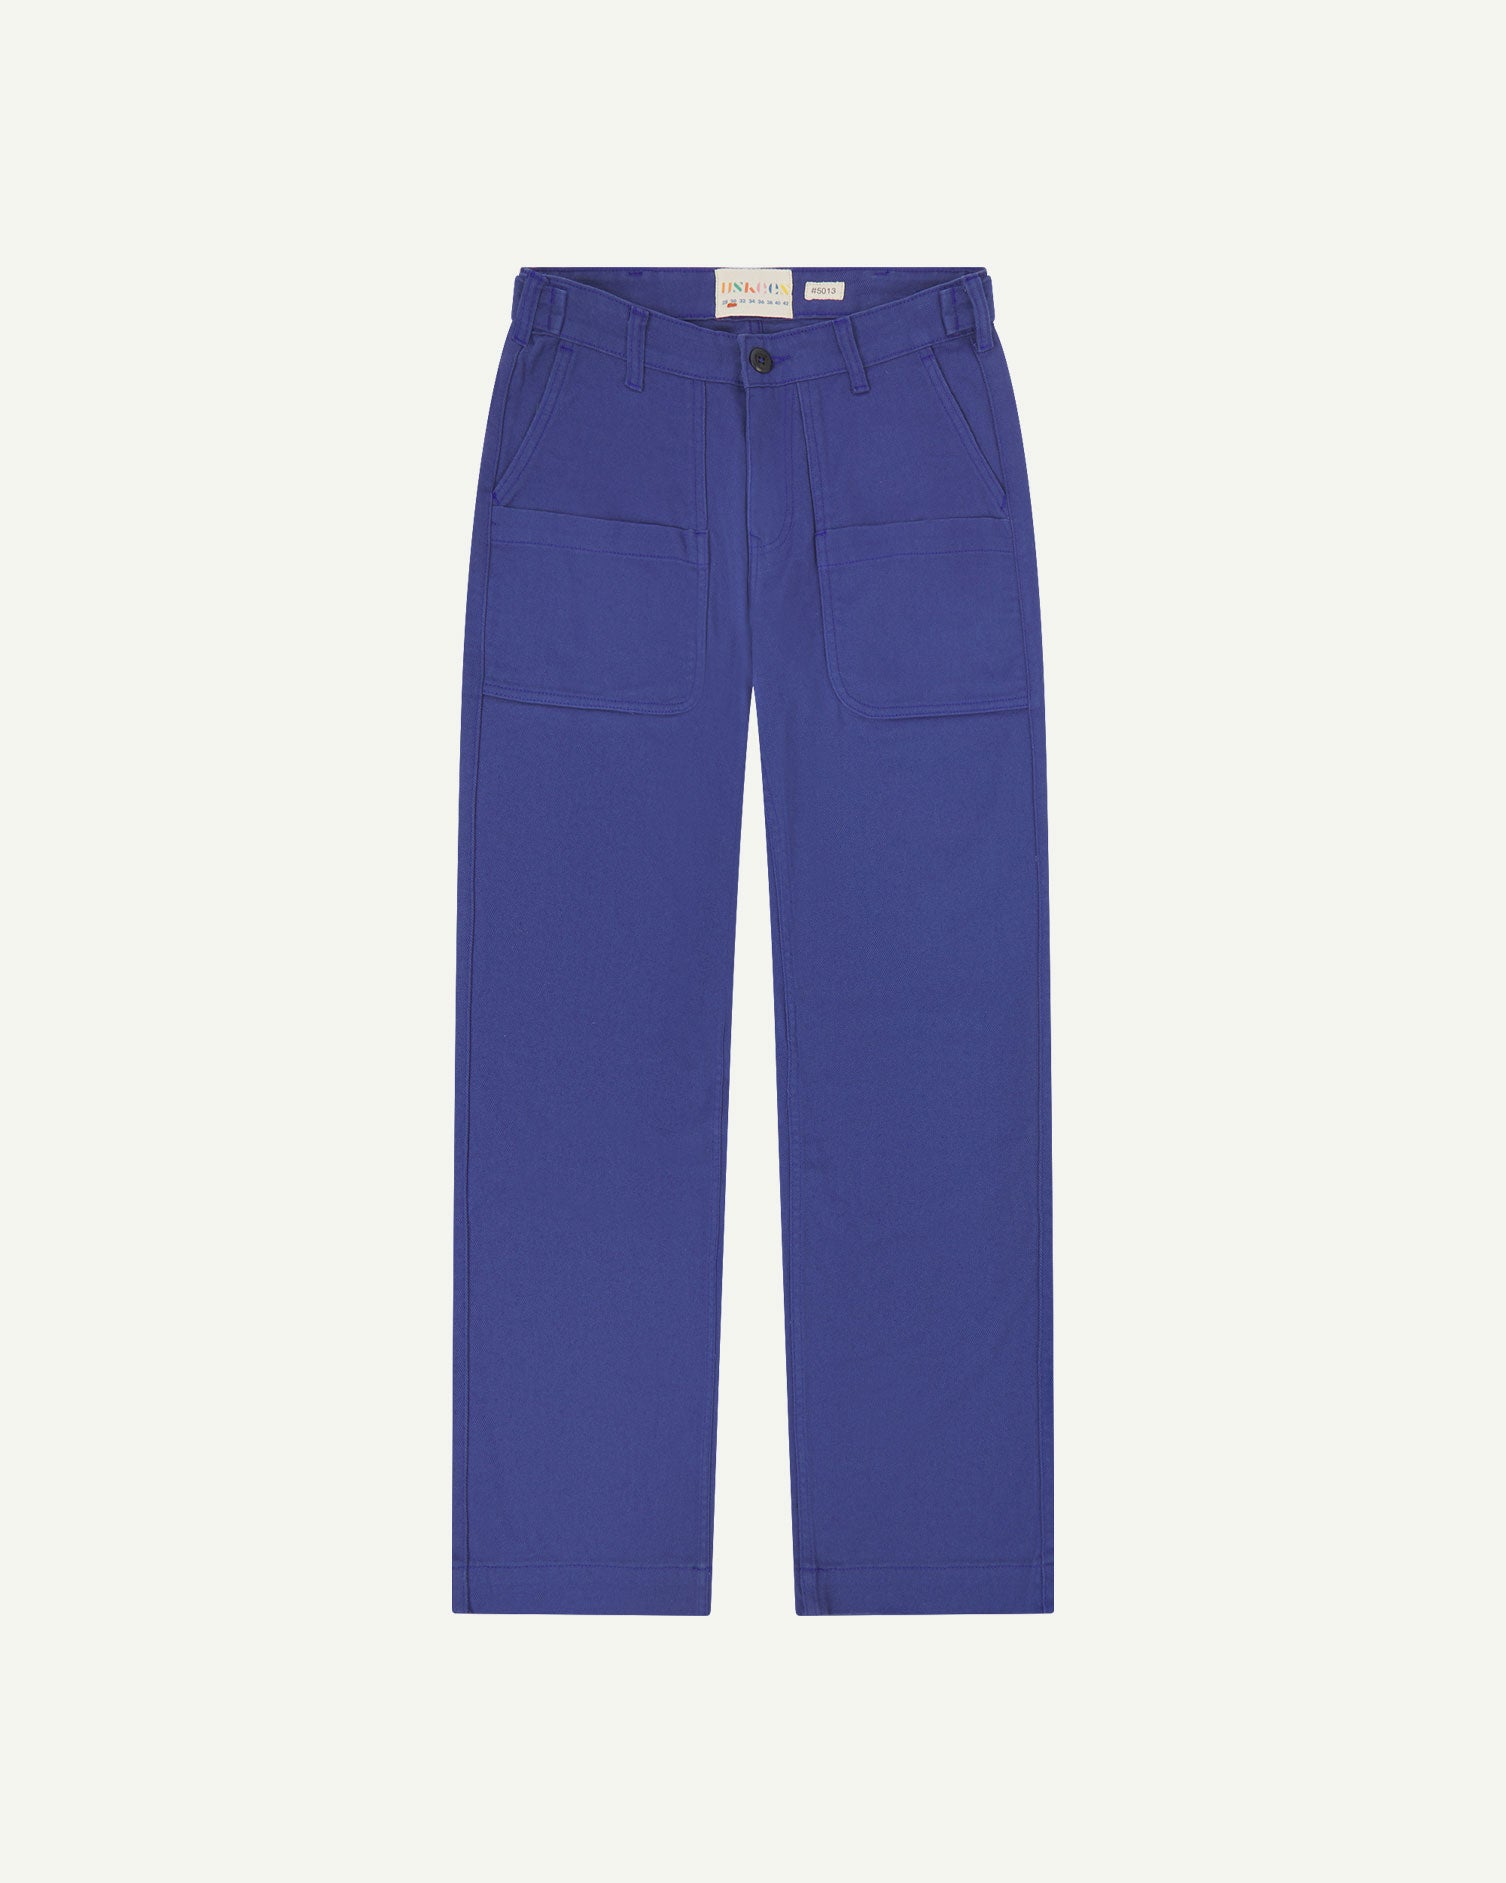 Front flat view of 5013 Uskees drill straight leg pants in ultra blue,with focus on front pockets, layered pockets, belt loops and Uskees branding label.